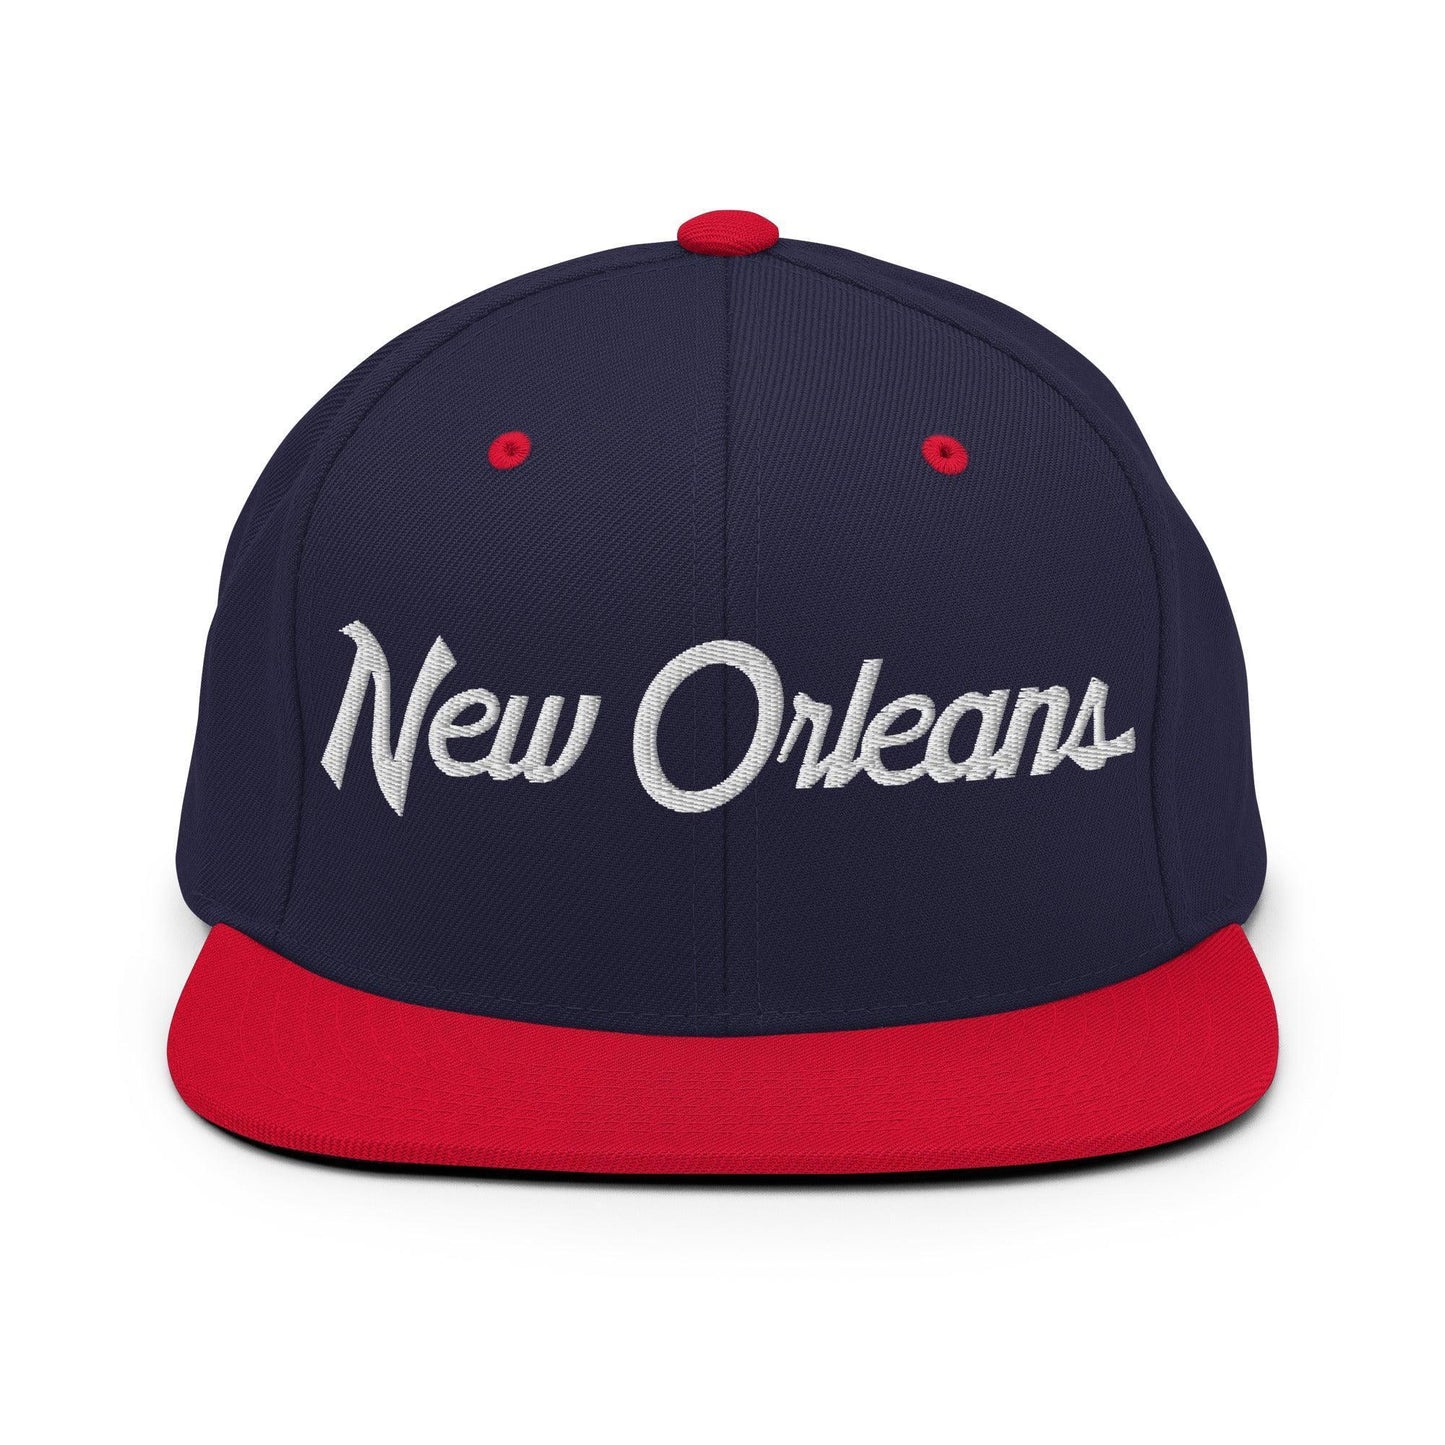 New Orleans Script Snapback Hat Navy/ Red